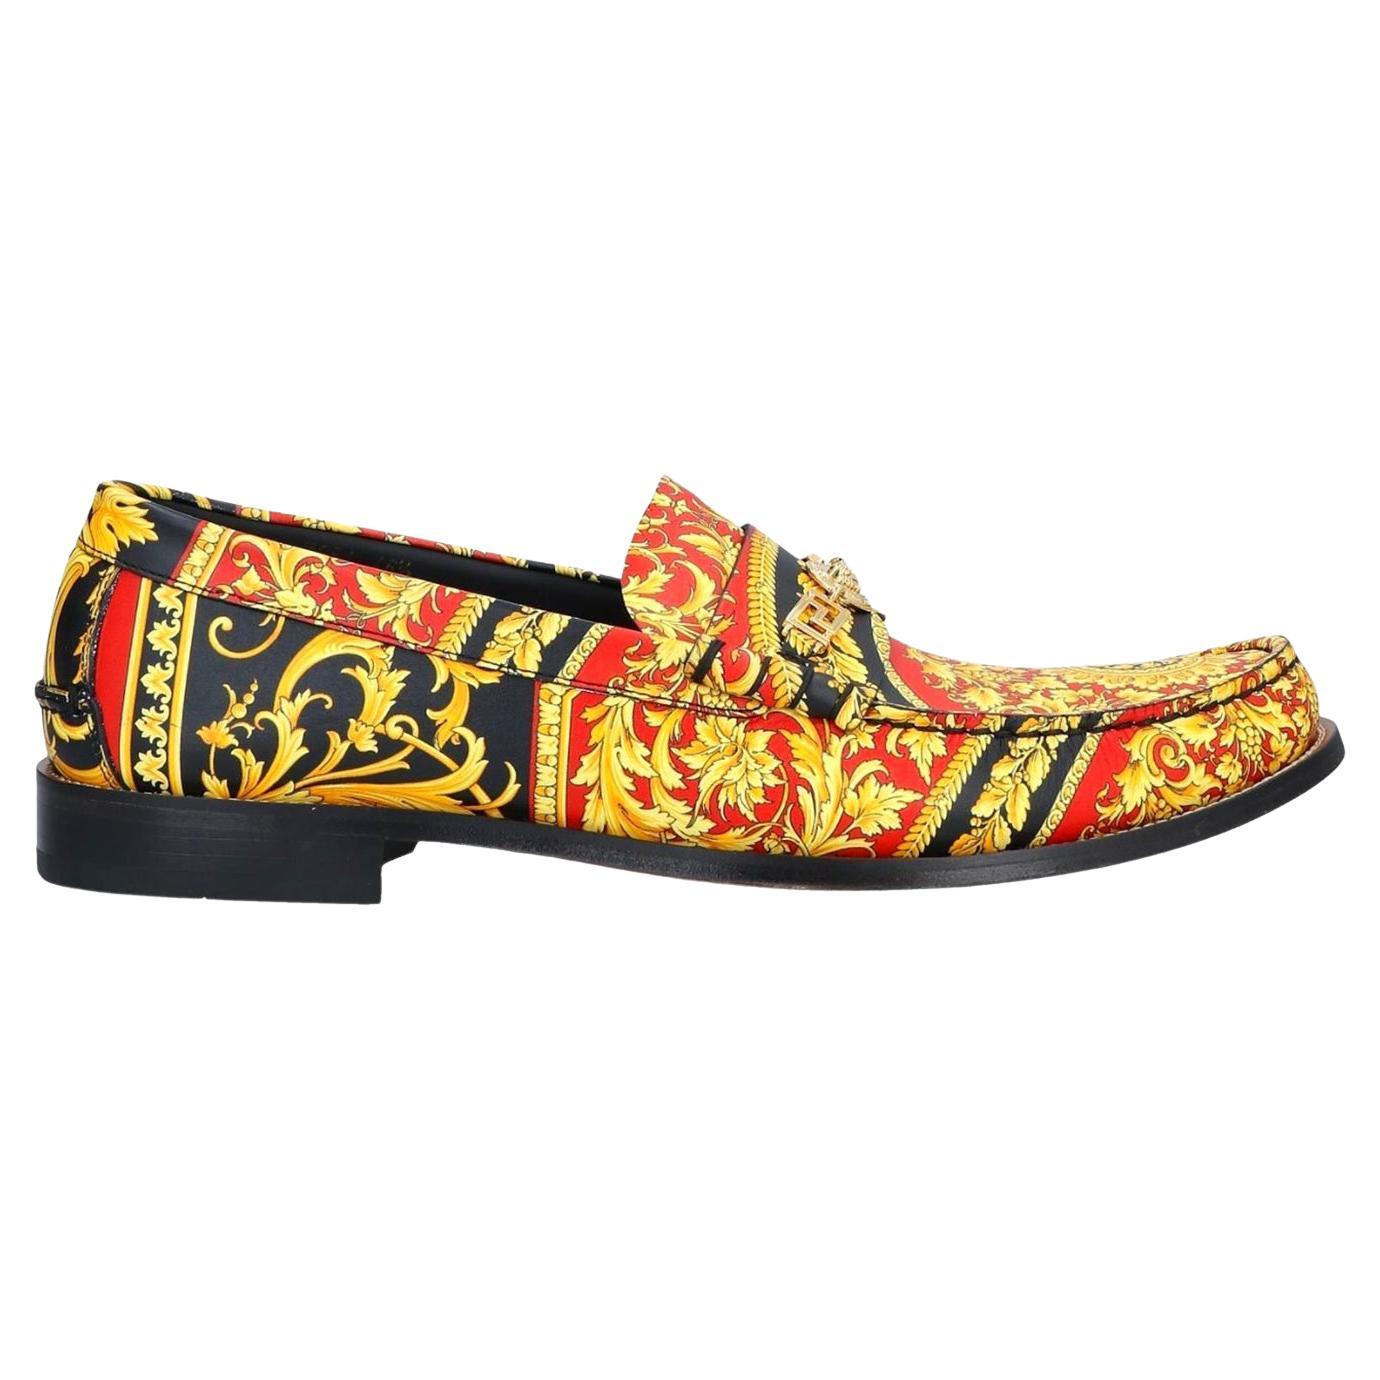 New VERSACE LEATHER BAROQUE LOAFERS SHOES in RED and BLACK Size 46.5 - 13.5